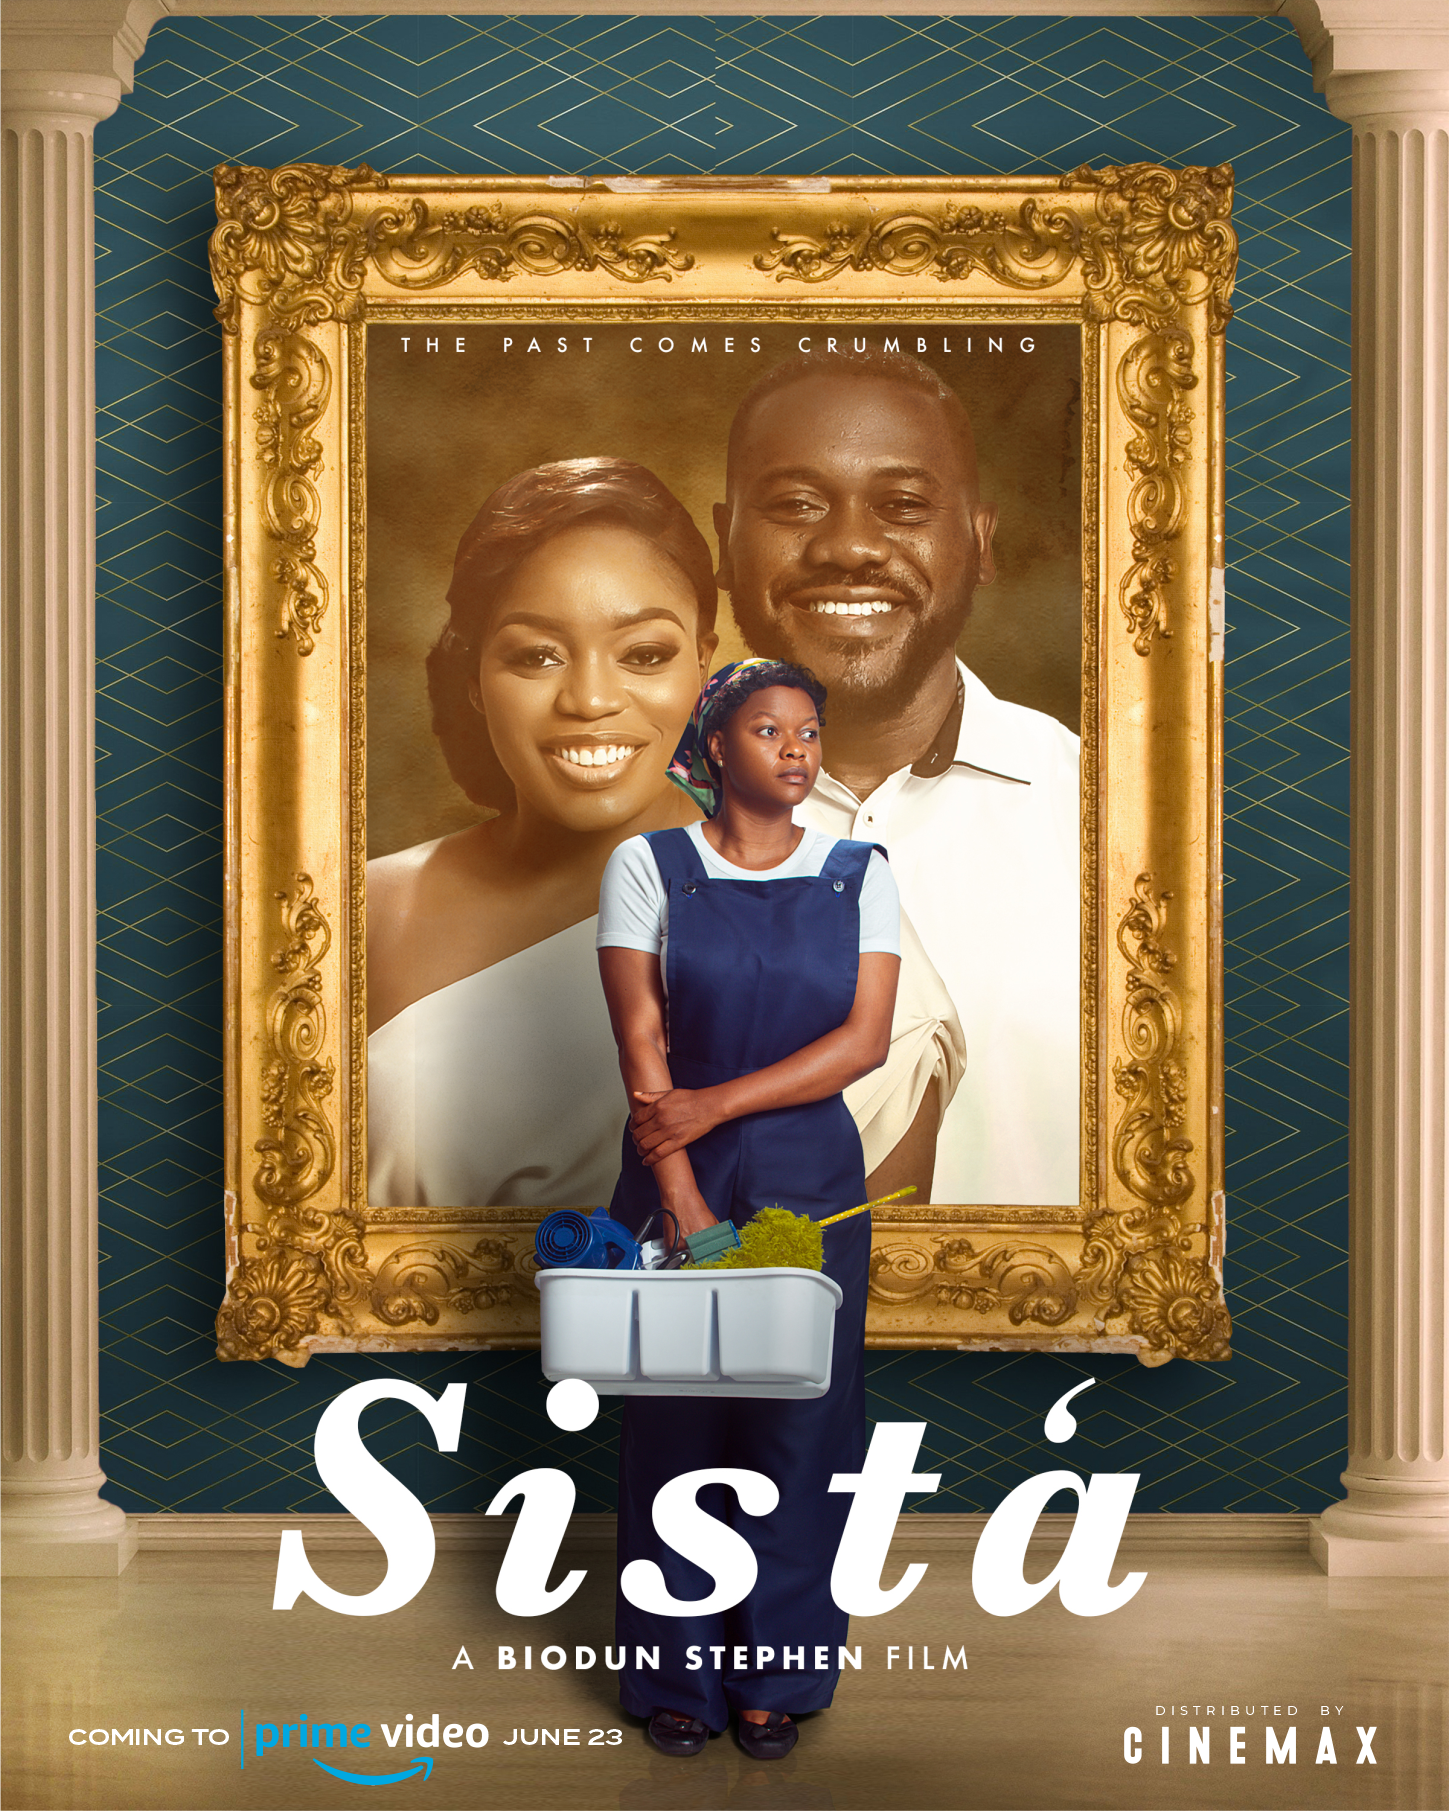 Sista Coming soon 1 - Biodun Stephen On The Inspiration and Importance of The "Sista" Story